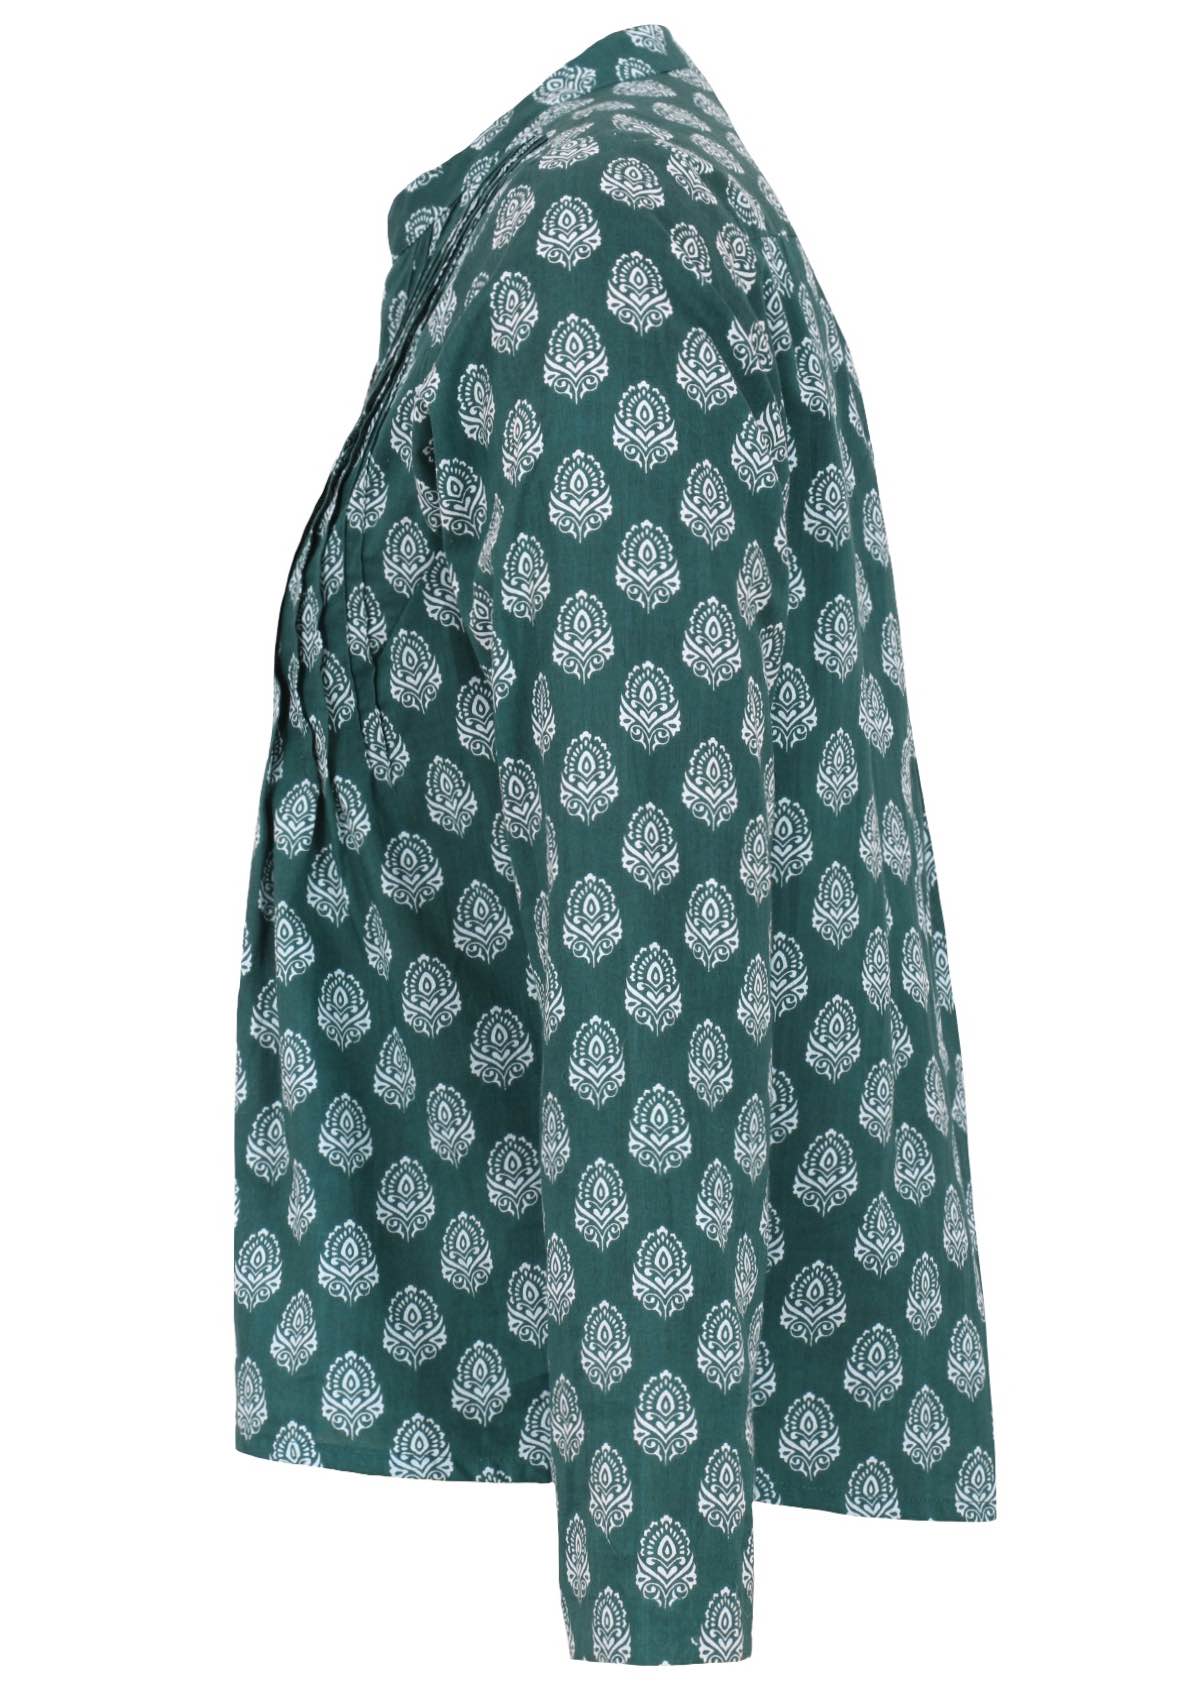 Long skeeve cotton top with white pendant print on dark green base